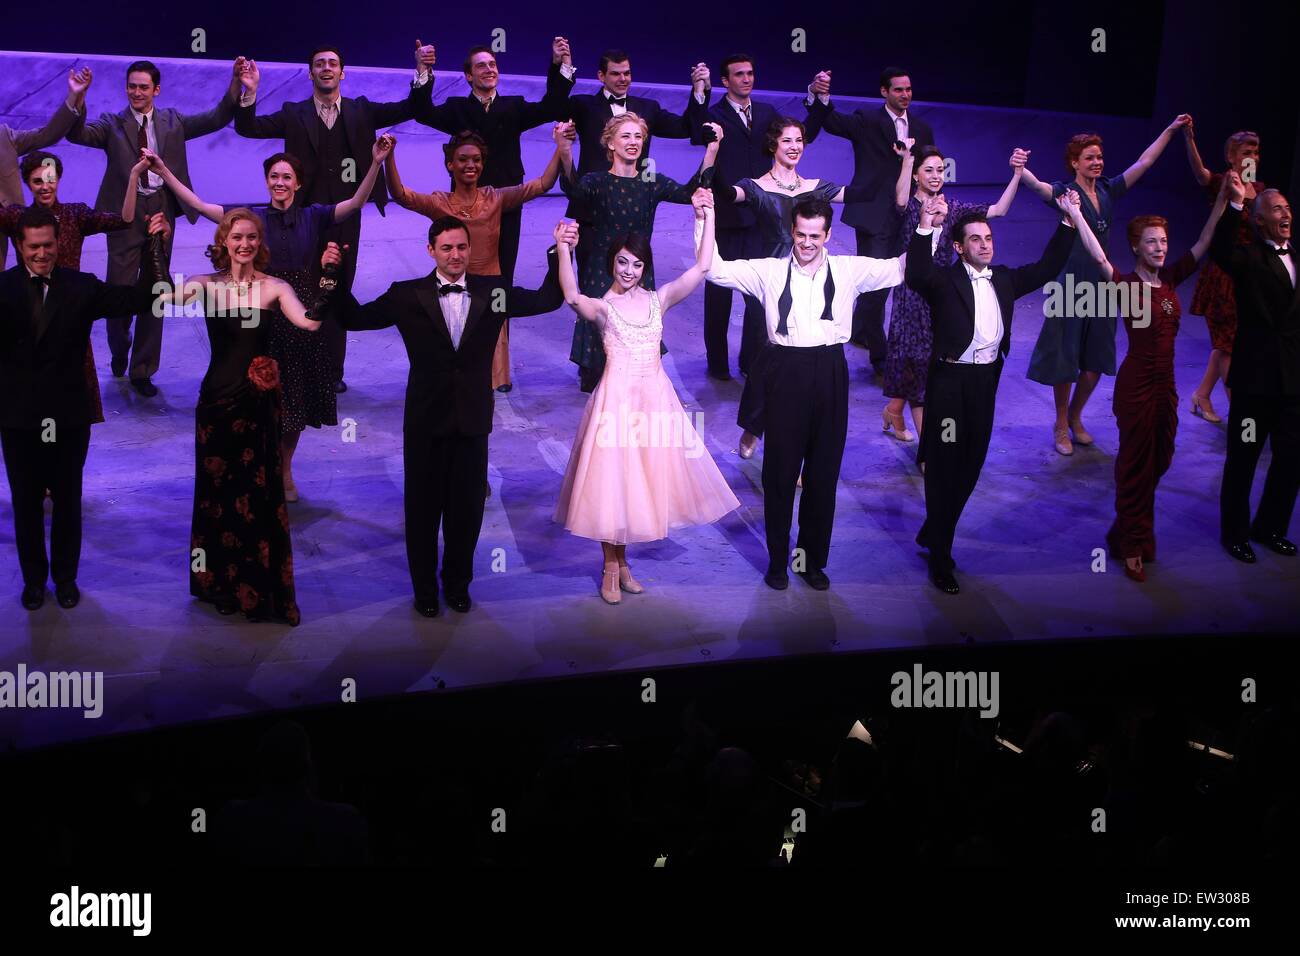 Opening night for An American in Paris at the Palace Theatre - Curtain Call.  Featuring: Jill Paice, Max von Essen, Leanne Cope, Robert Fairchild, Brandon Uranowitz, Veanne Cox, cast Where: New York City, New York, United States When: 12 Apr 2015 C Stock Photo